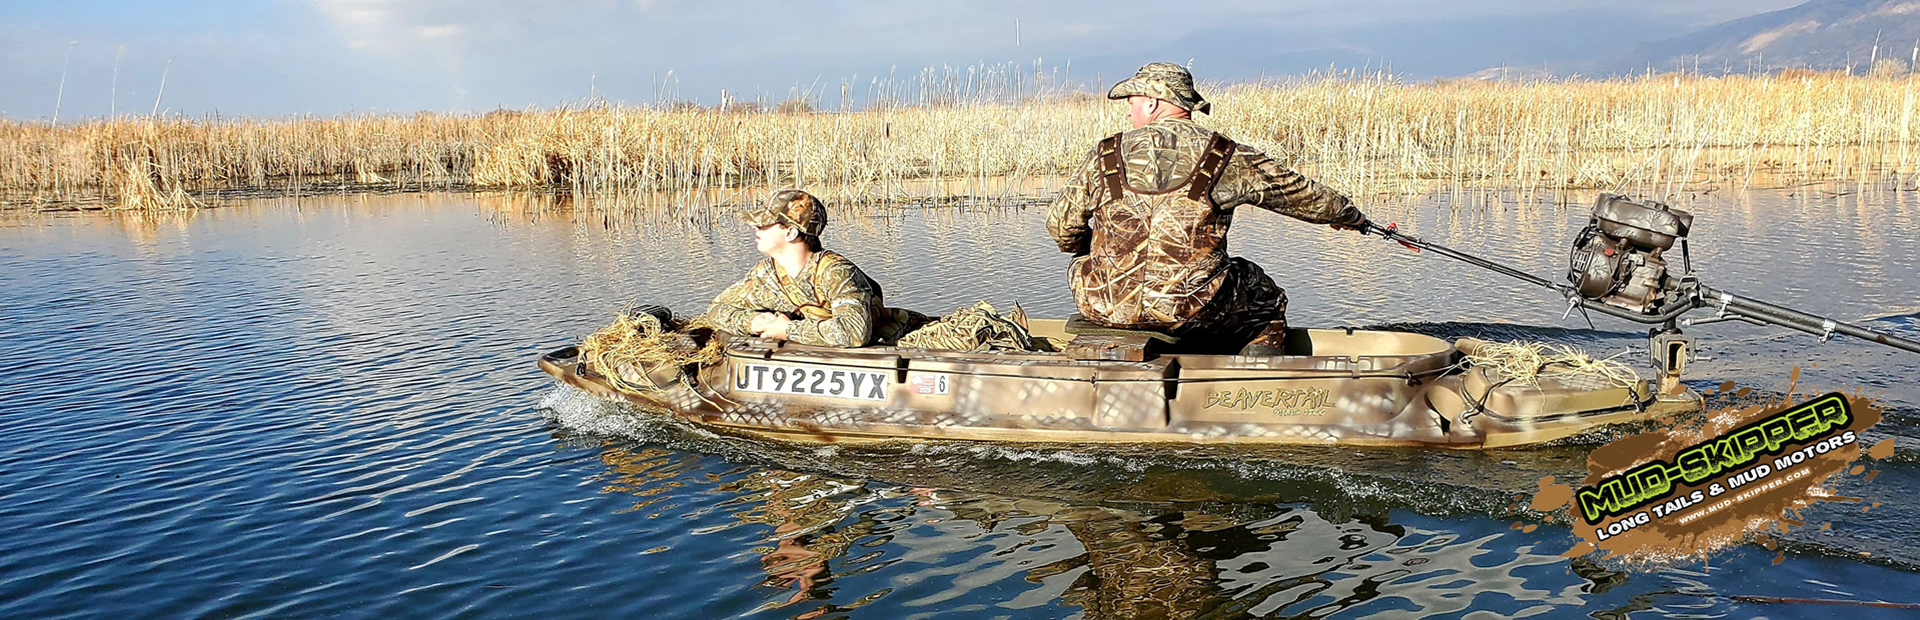 duck hunting boats with mud motor